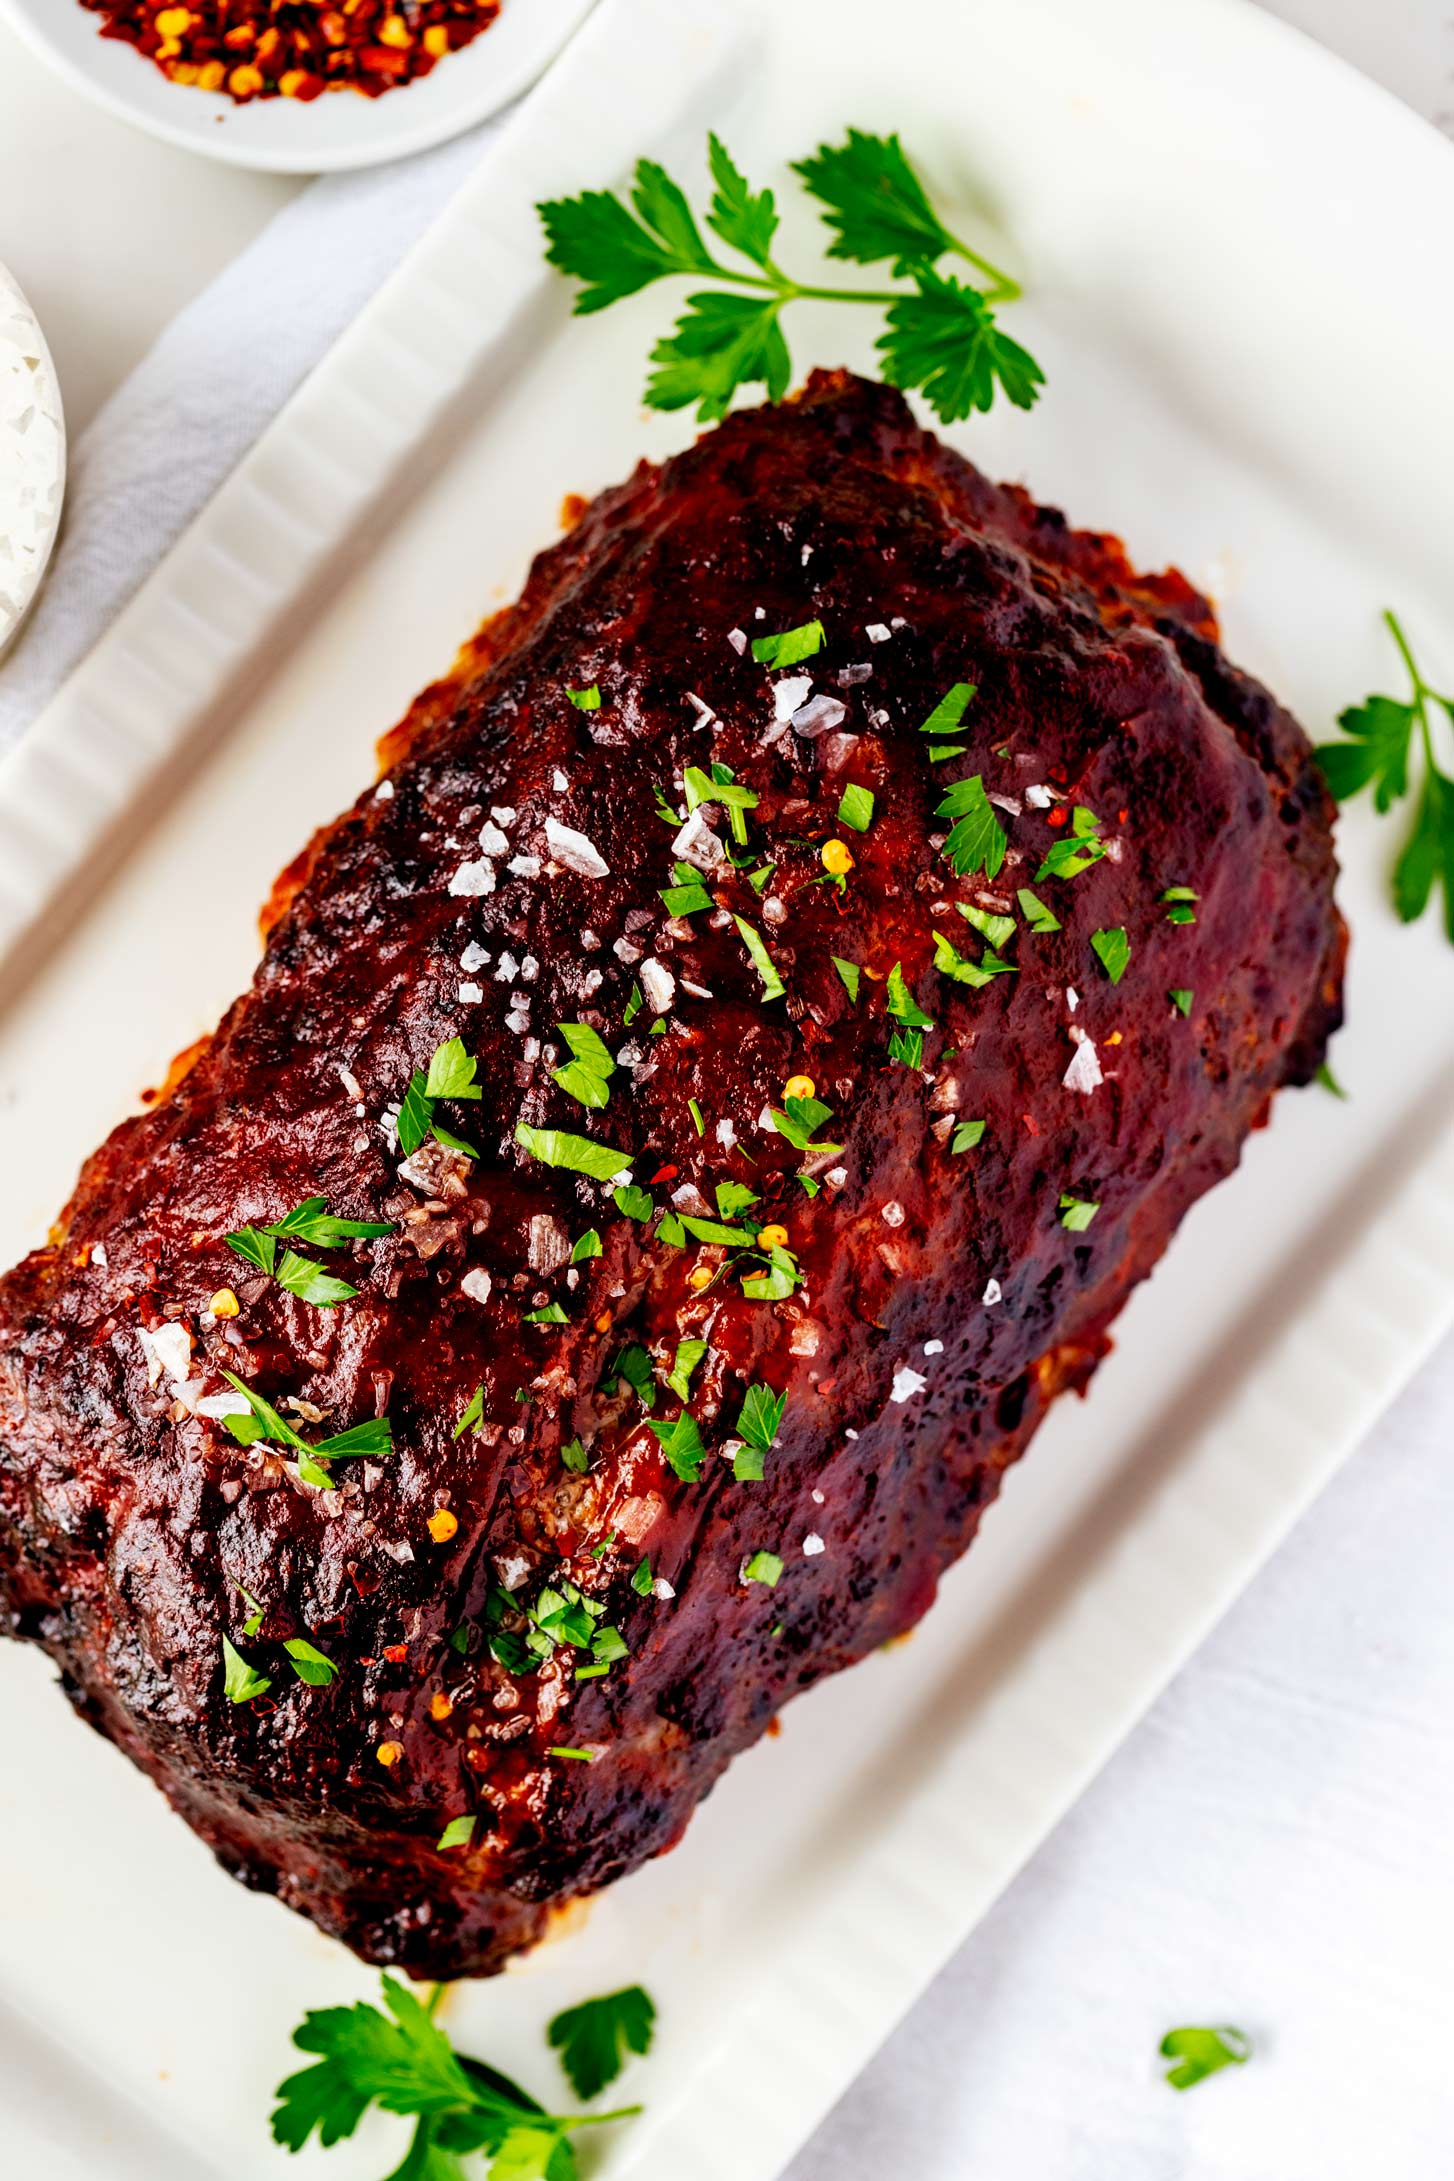 Overhead photo of meatloaf on a rectangular white platter garnished with flakey salt and parsley.